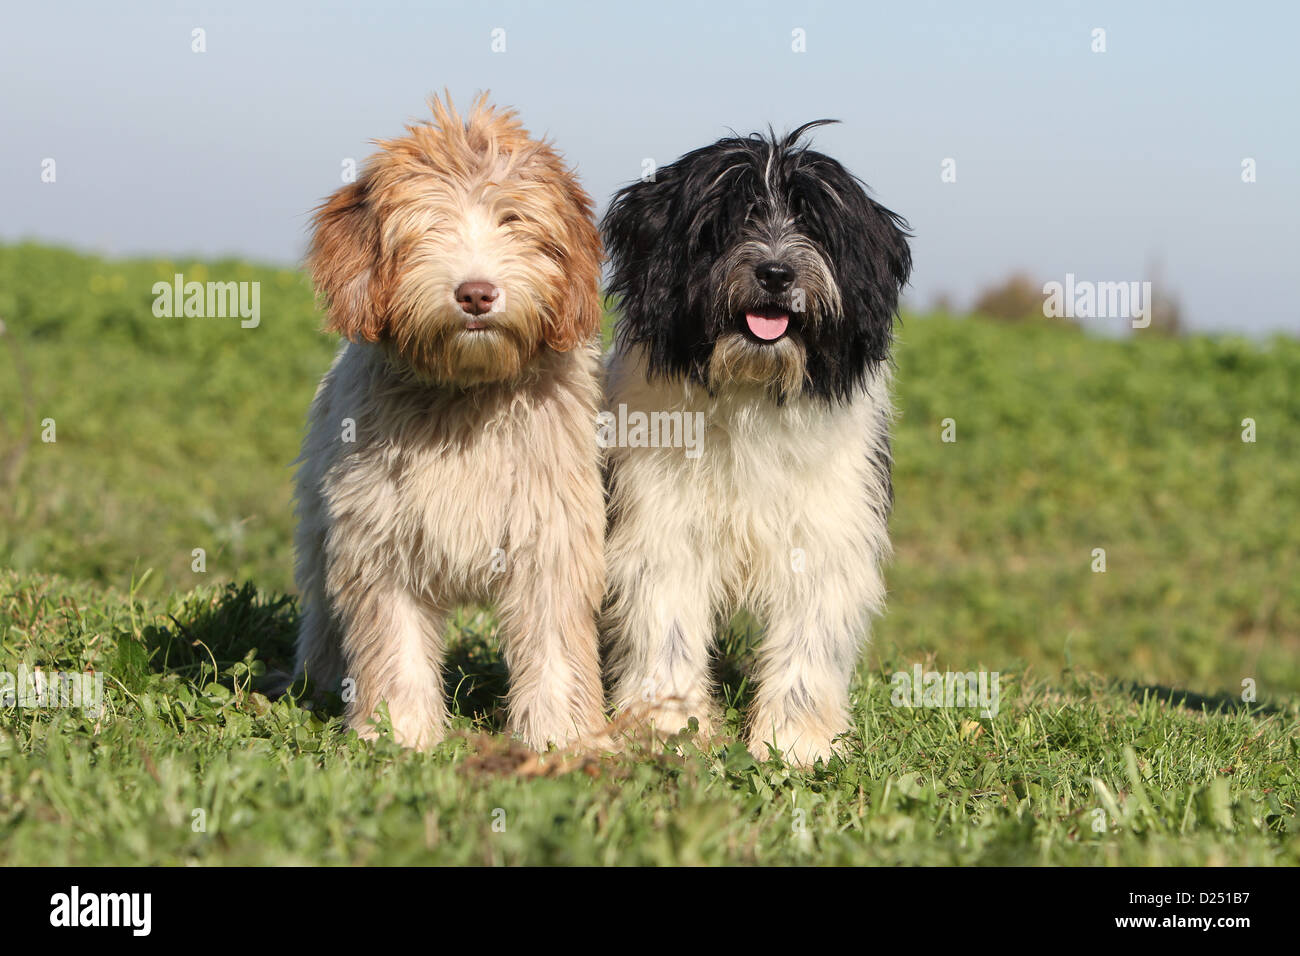 Dog Schapendoes / Dutch Sheepdog two puppies different colors standing in a meadow Stock Photo